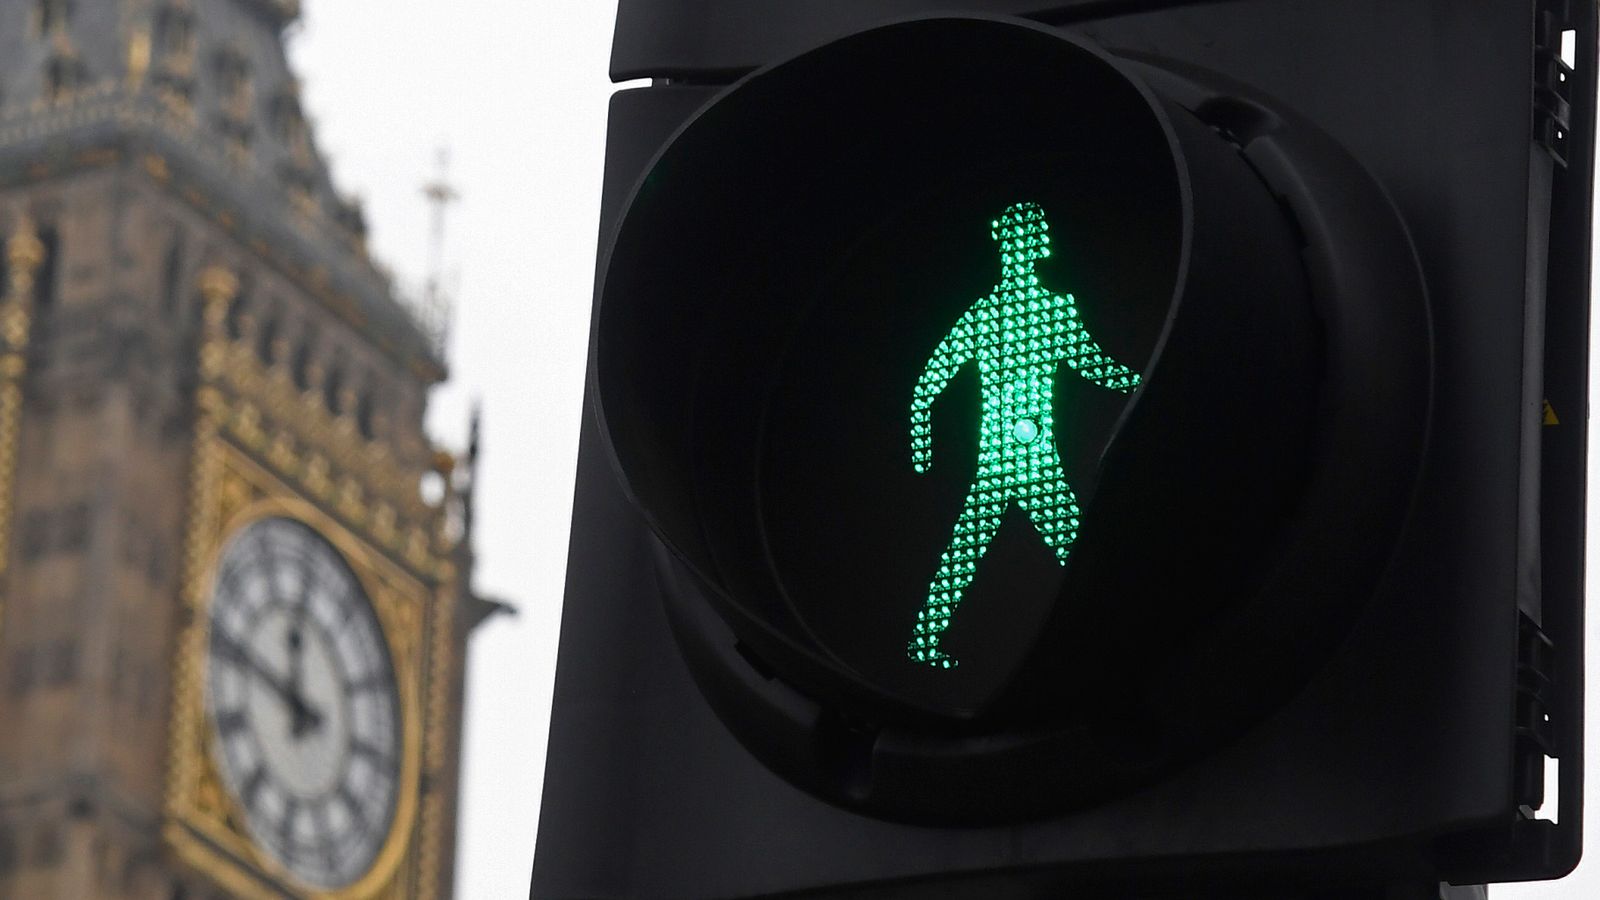 Pedestrians to have extra second at green man to cross road | UK News